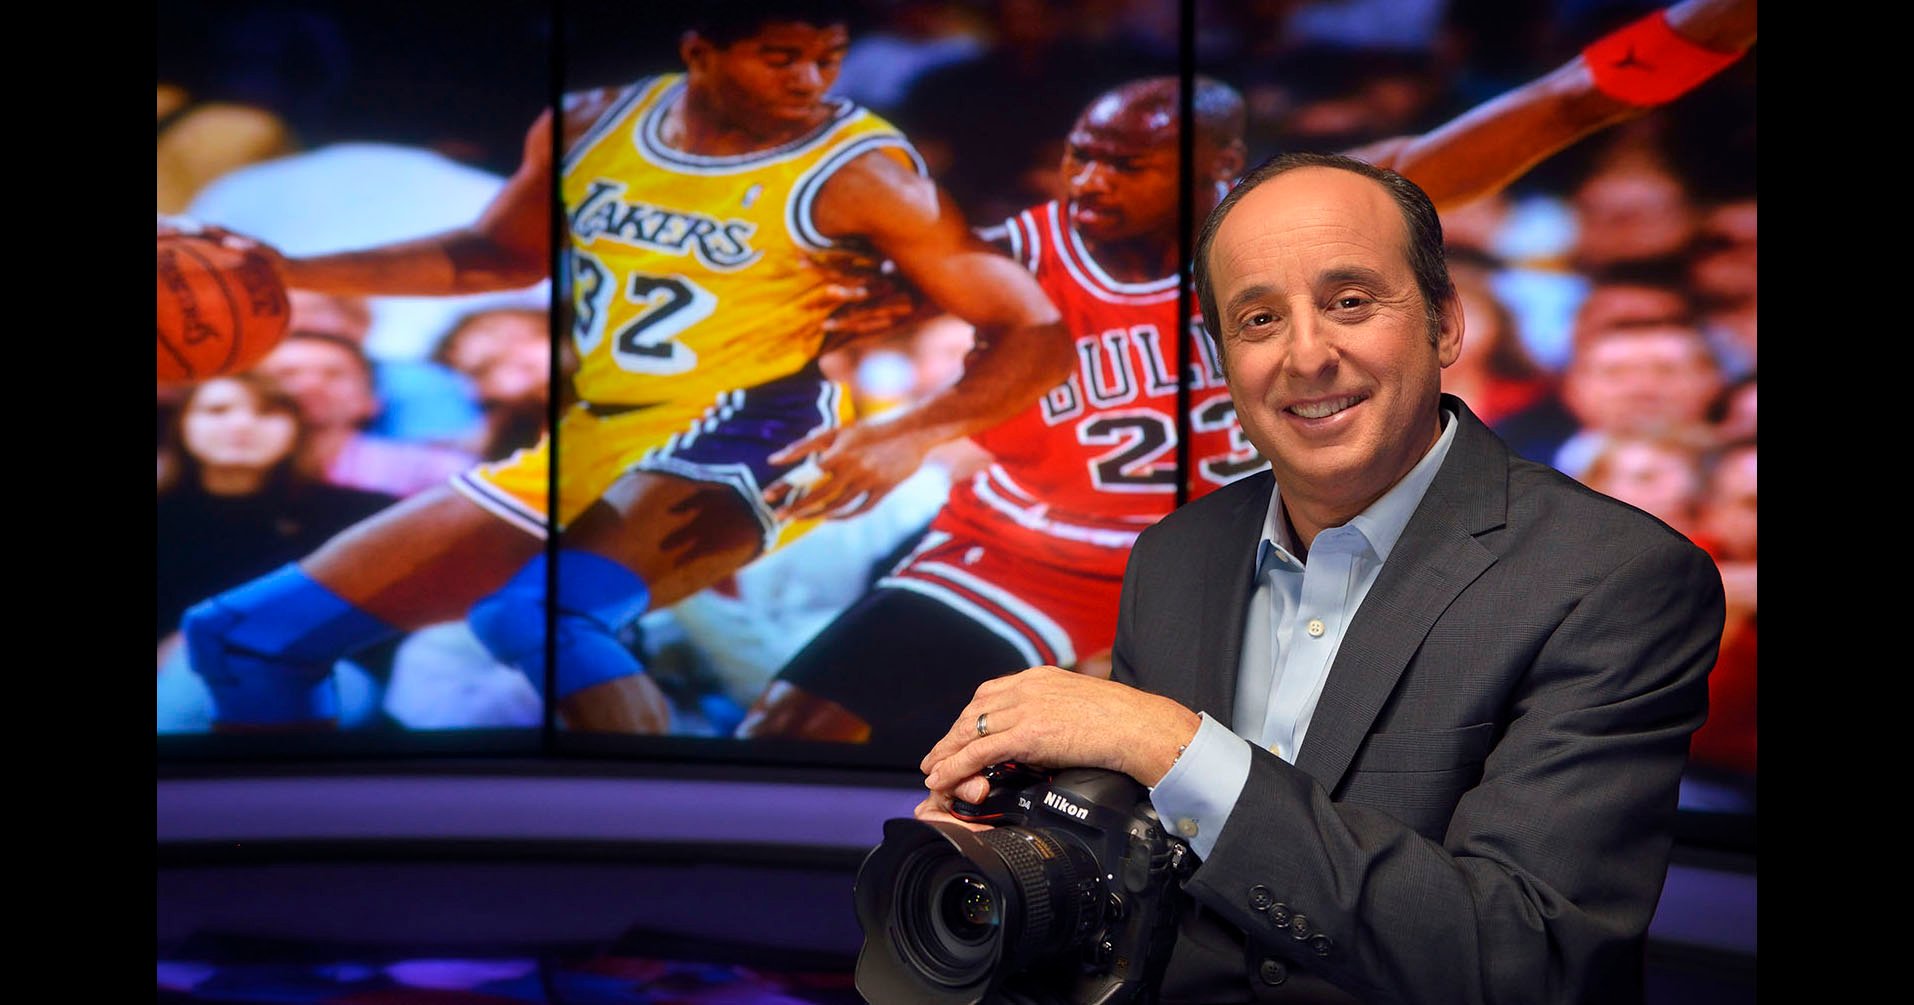 Andrew Bernstein: The Photographer Behind Iconic NBA Photographs